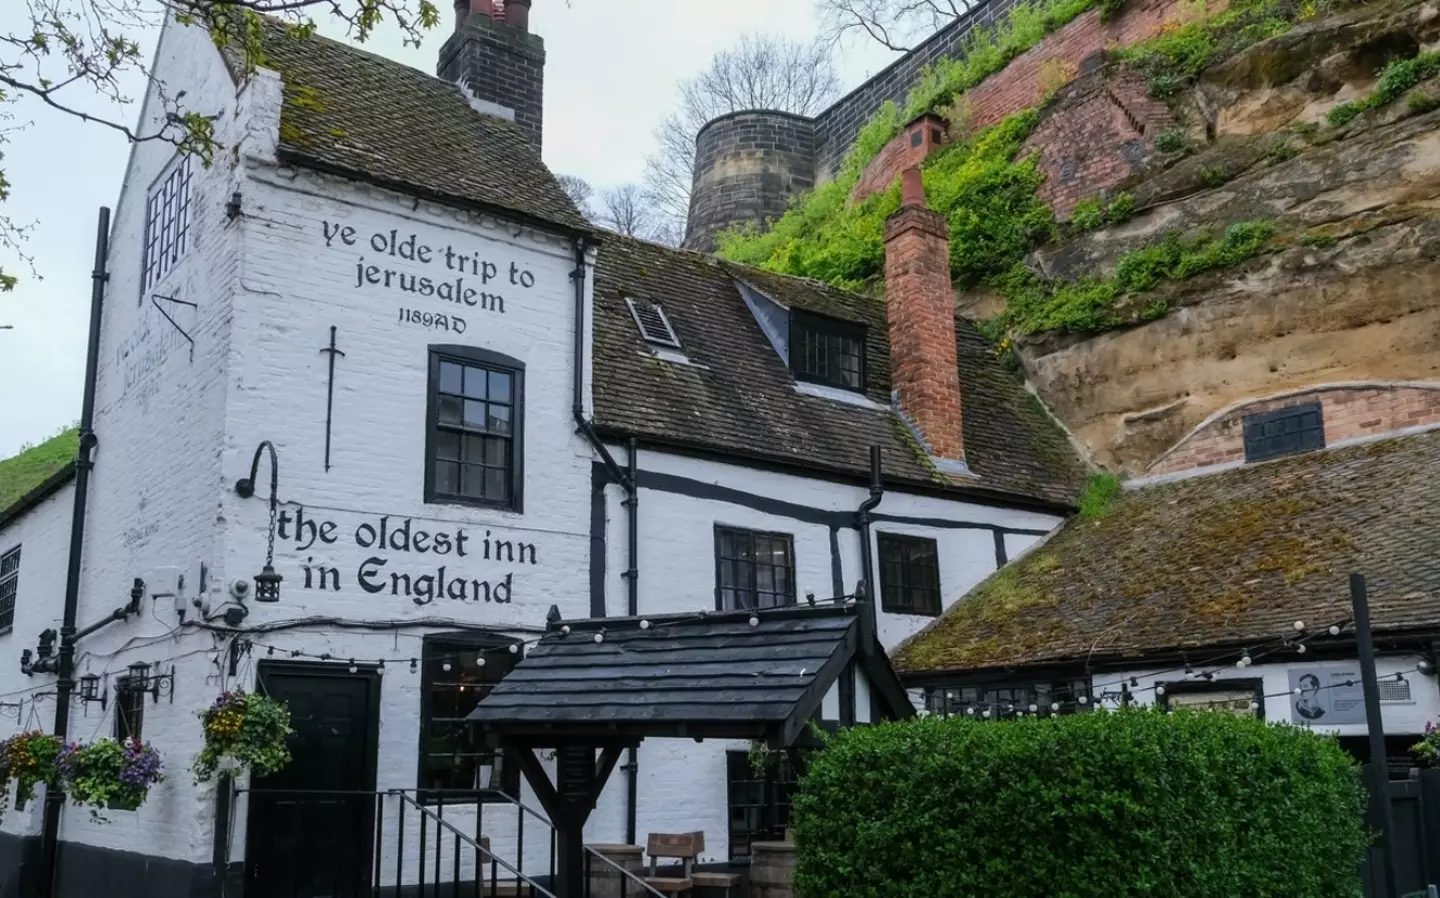 One of the pubs doing the offer is Ye Olde Trip to Jerusalem, which claims to be the 'oldest inn in England'.